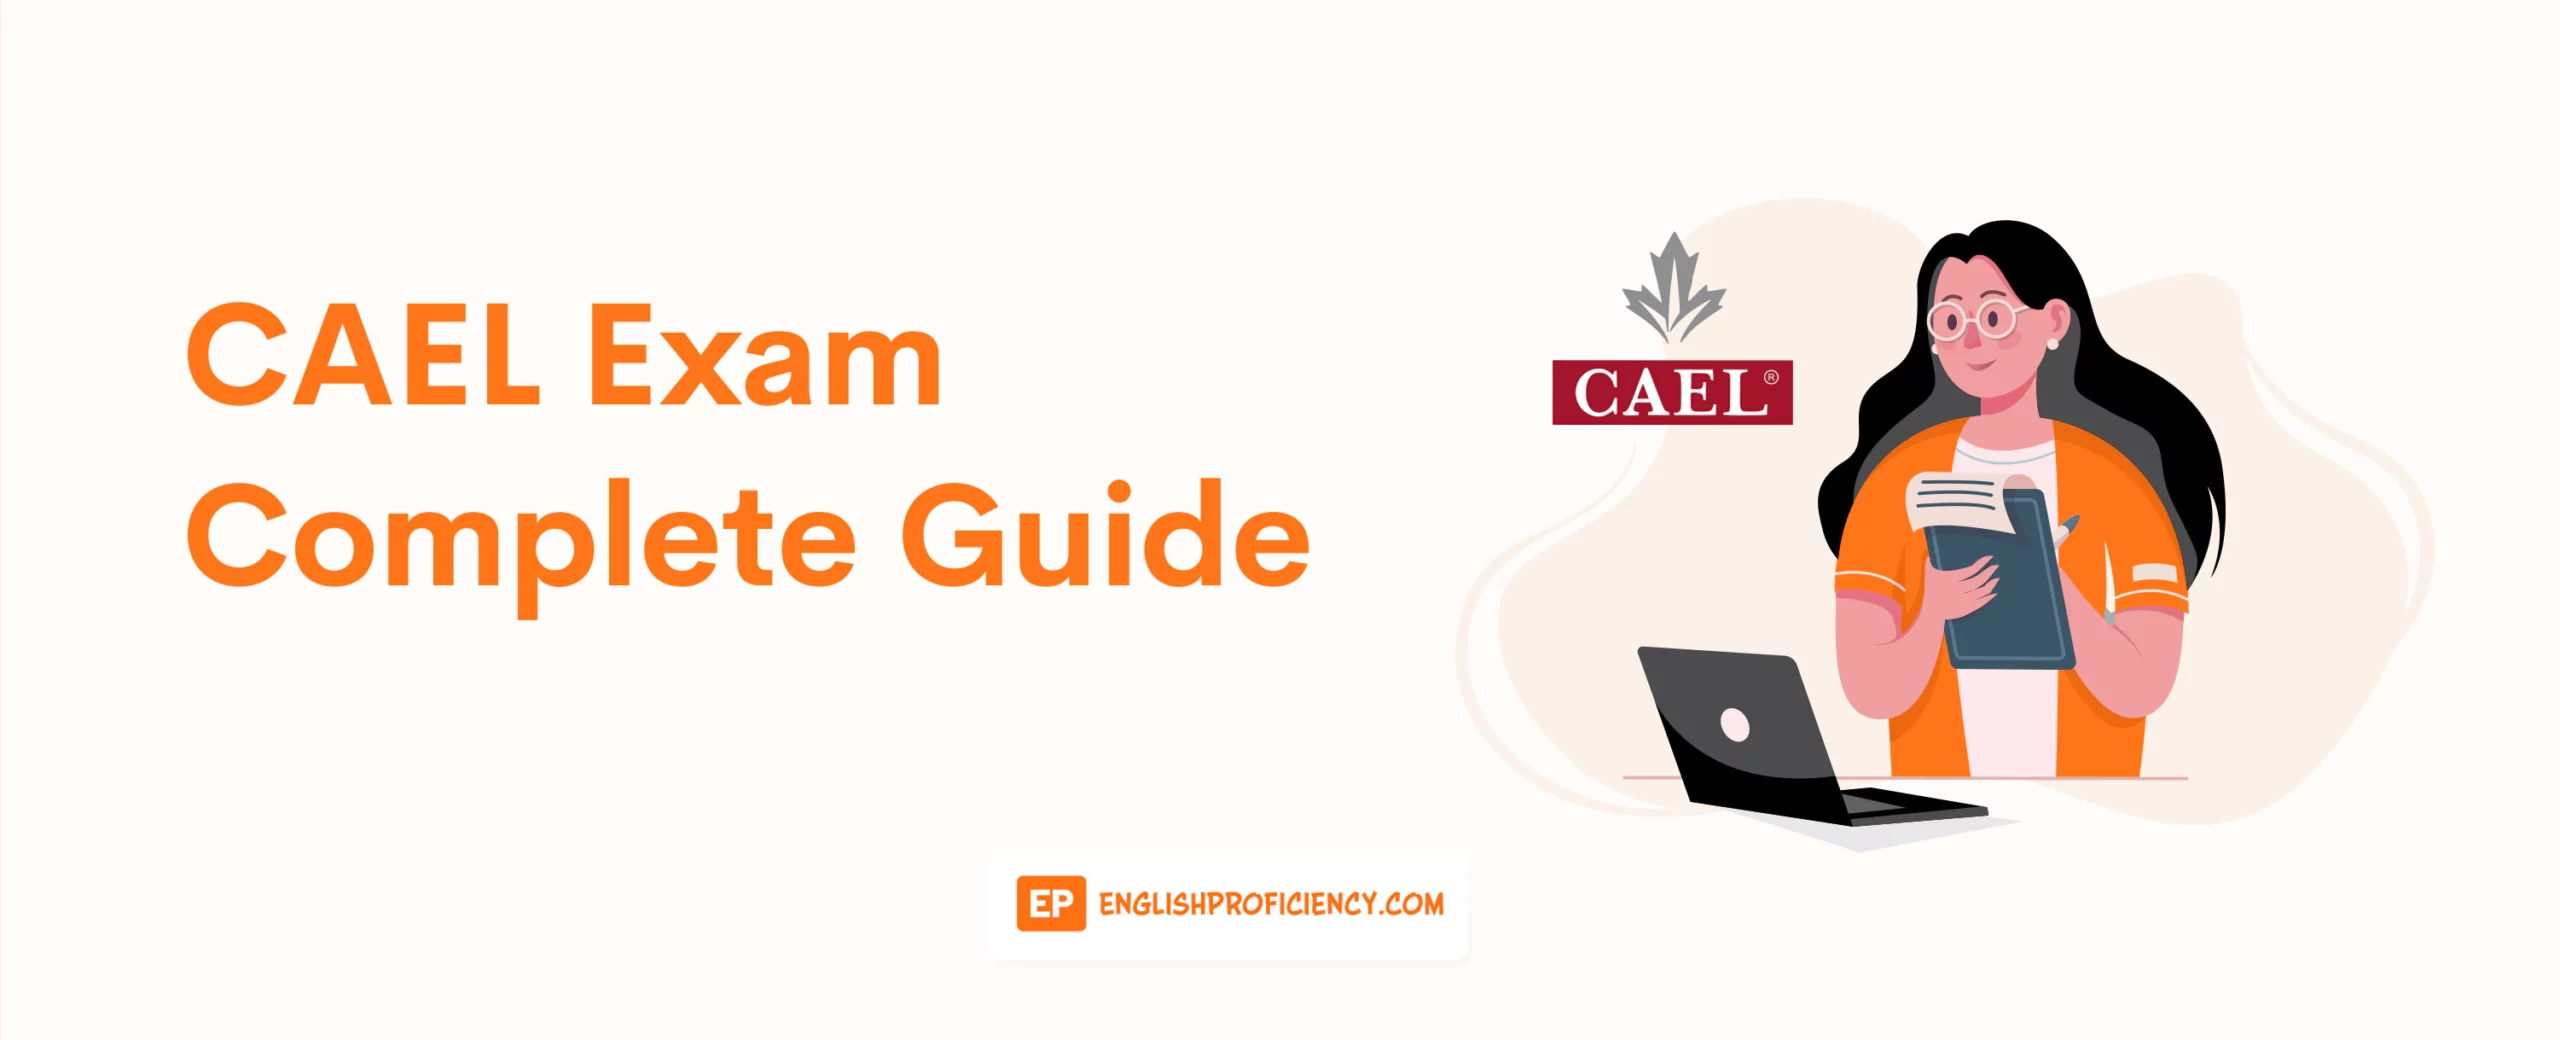 CAEL Exam Complete Guide